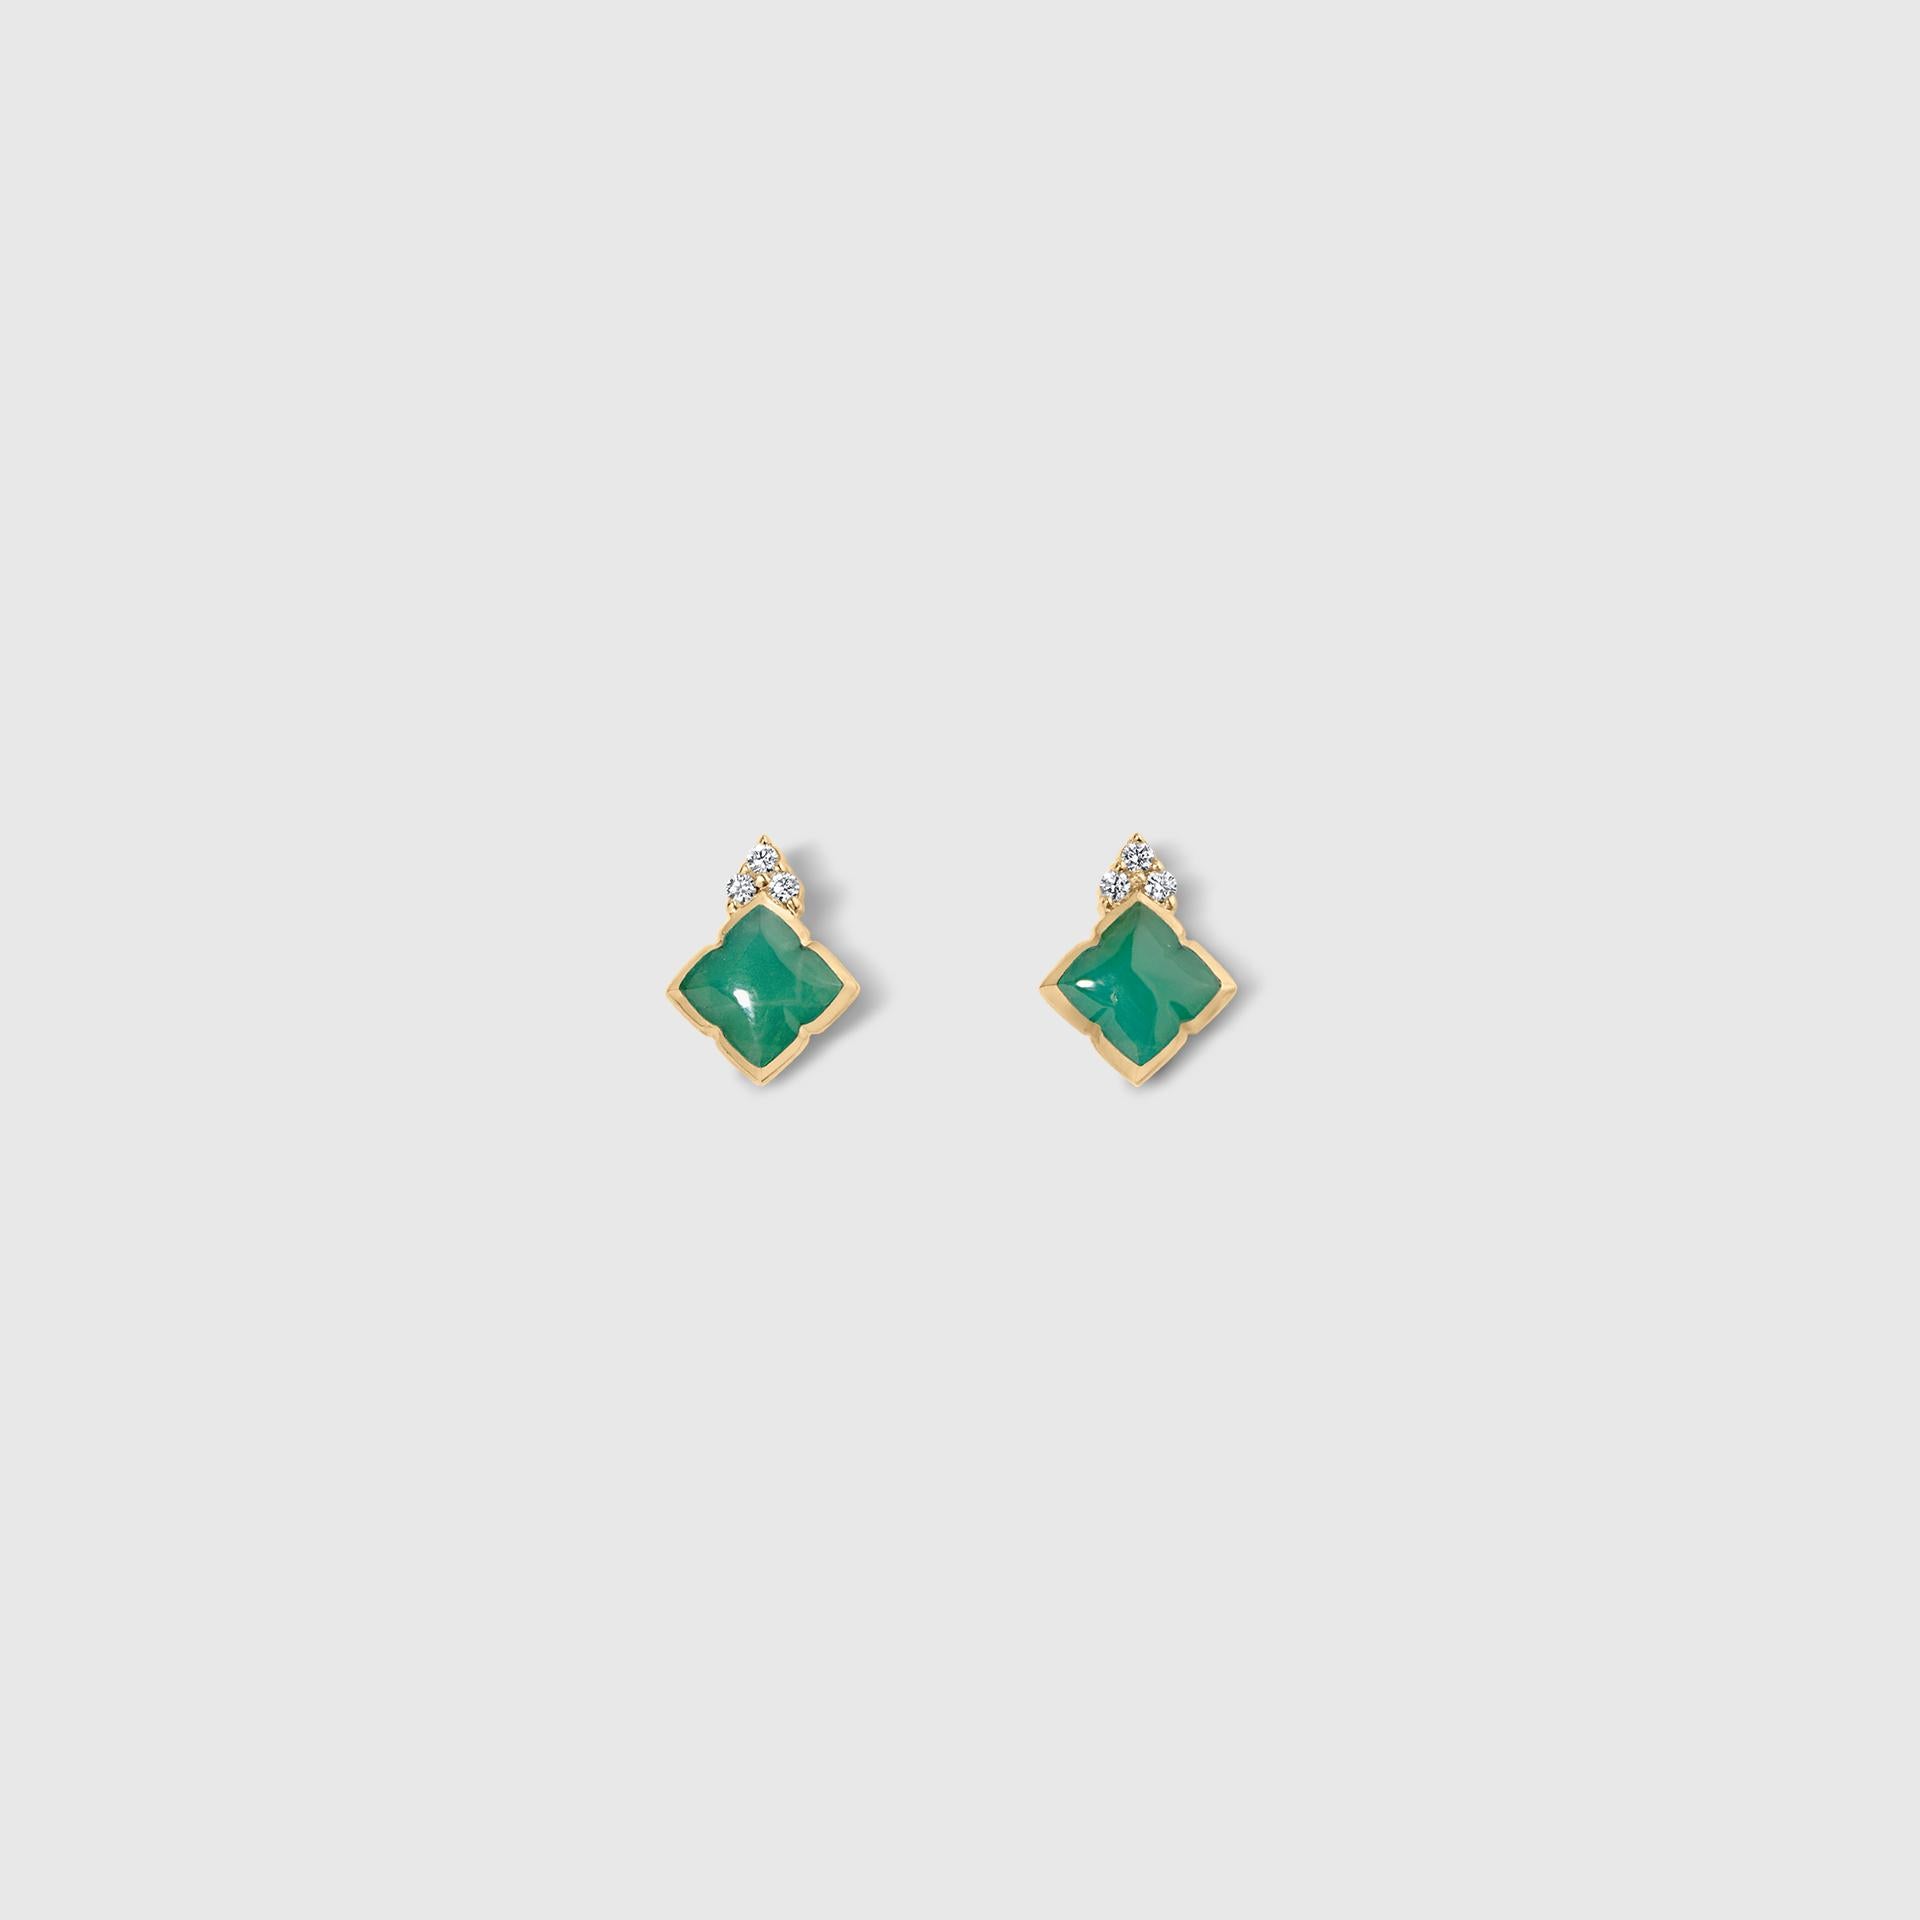 Contemporary Green Chrysoprase Inlay Post Earrings with Diamonds, 14 Karat Gold by Kabana For Sale